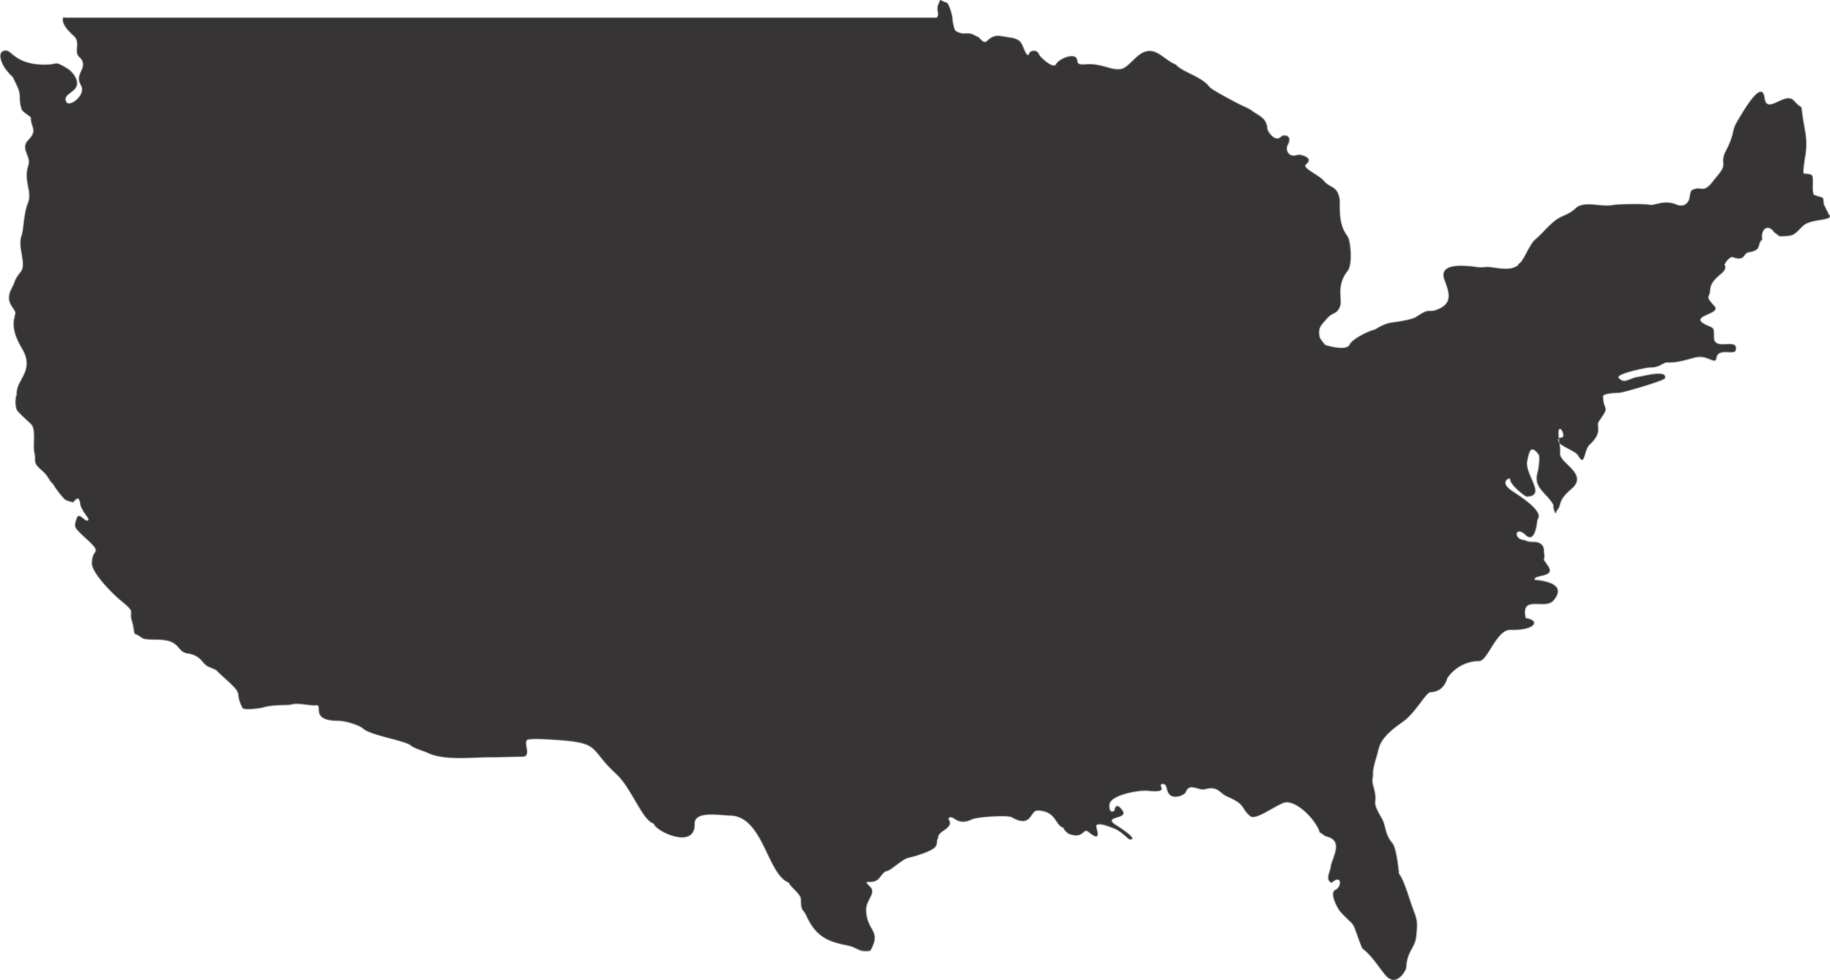 USA pin map location png